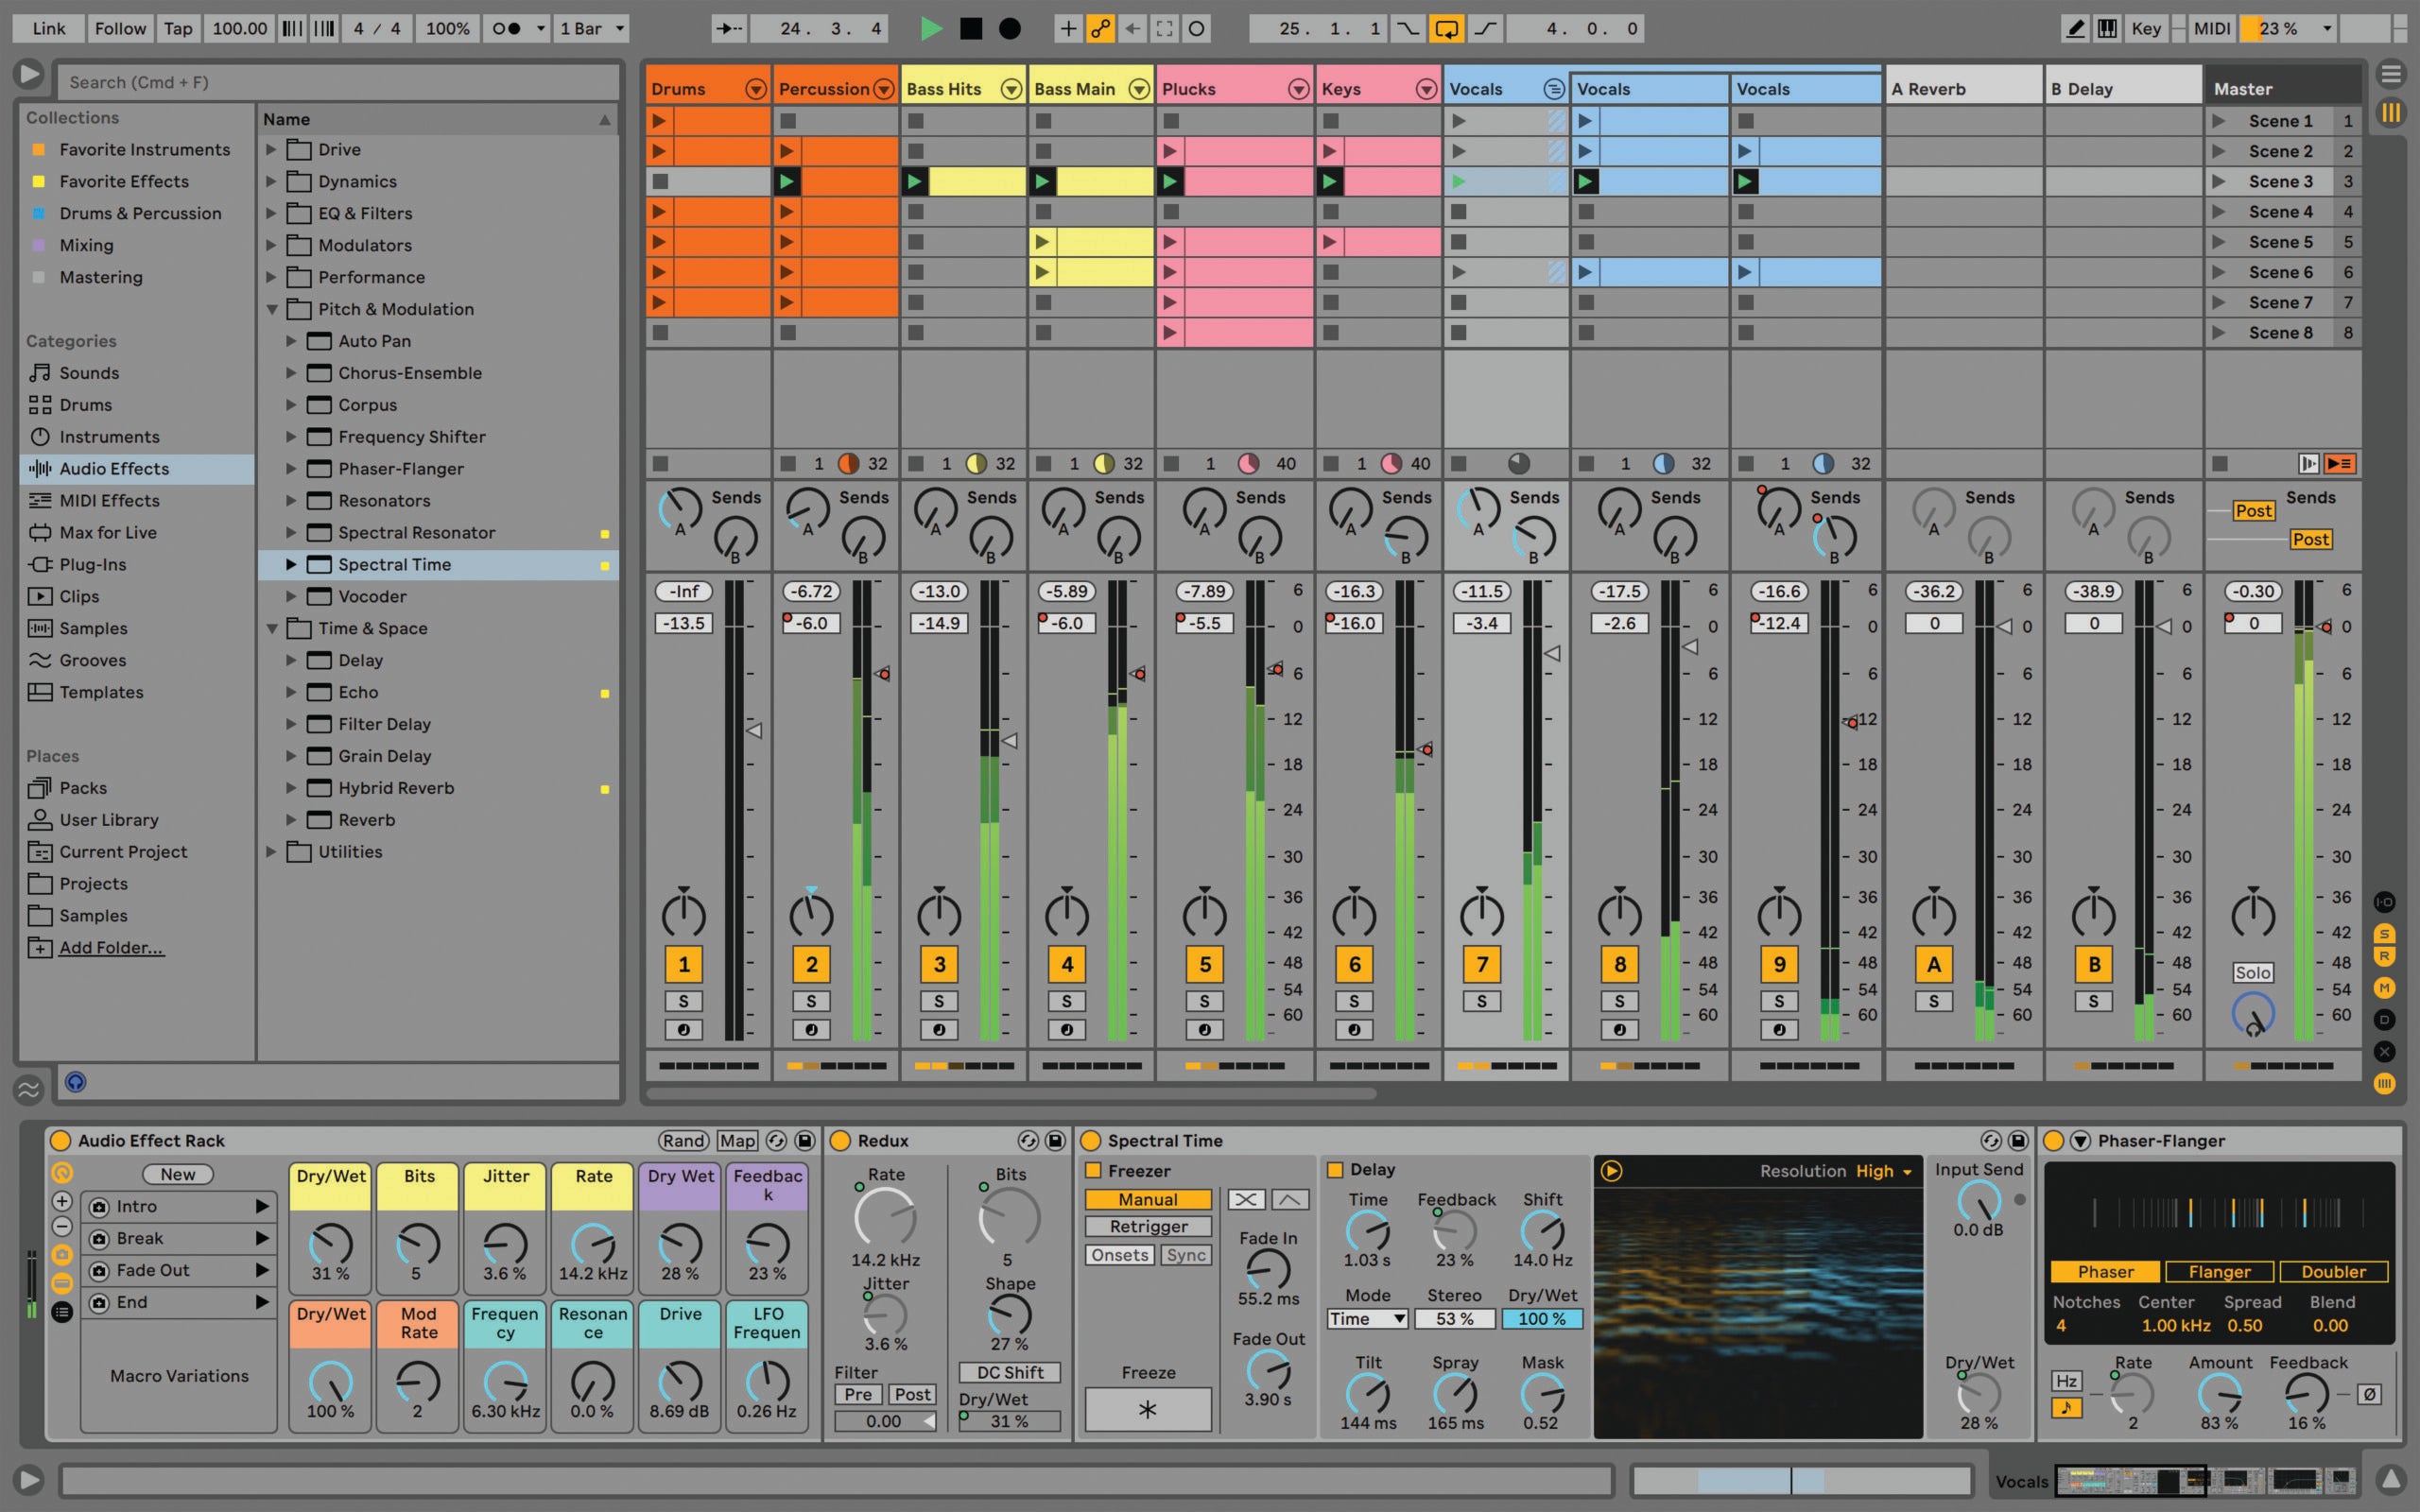 ableton live release 4 is the best recording software